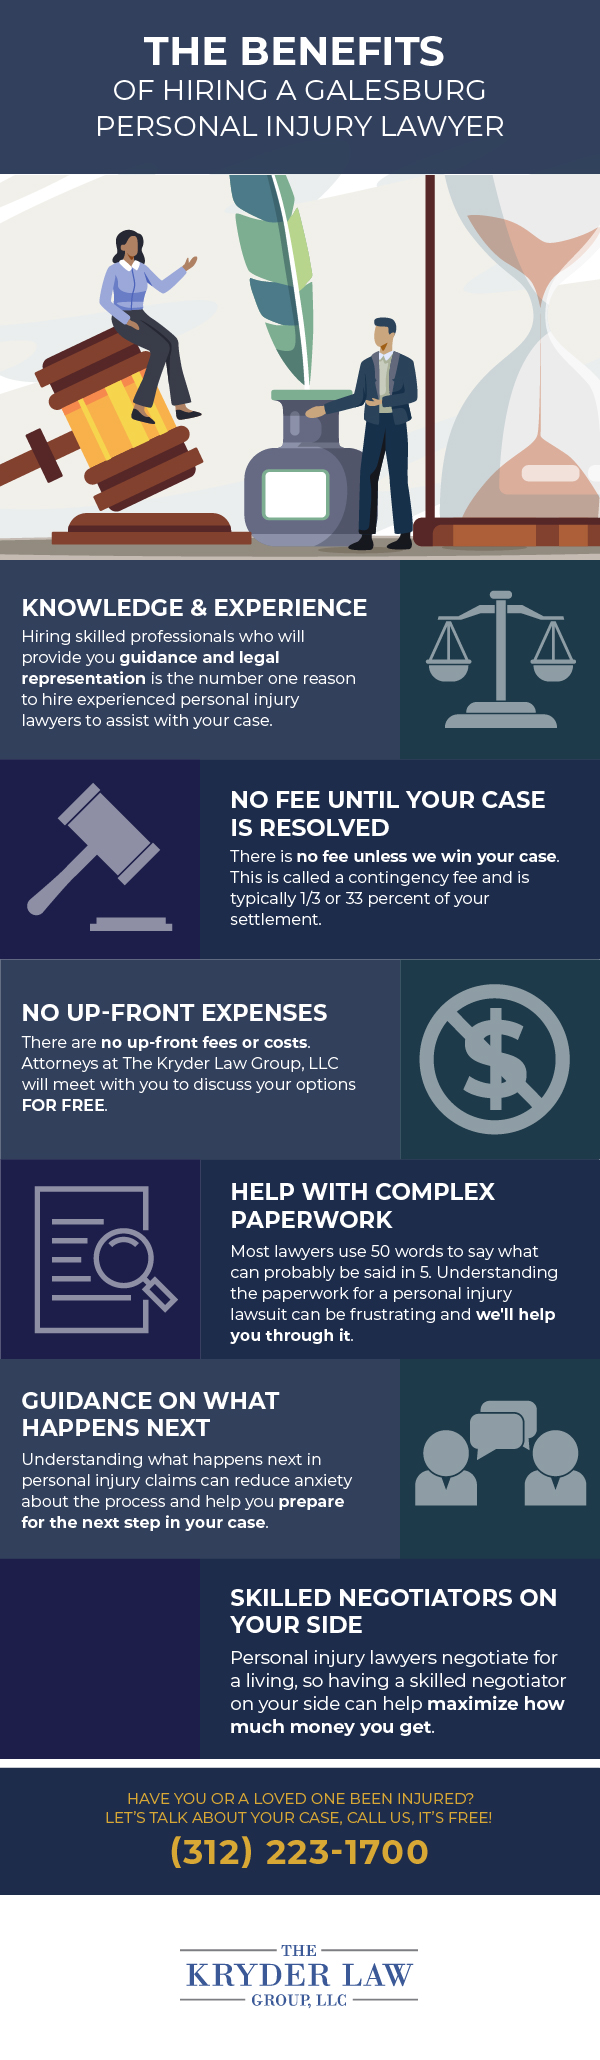 Galesburg Personal Injury Lawyer Infographic